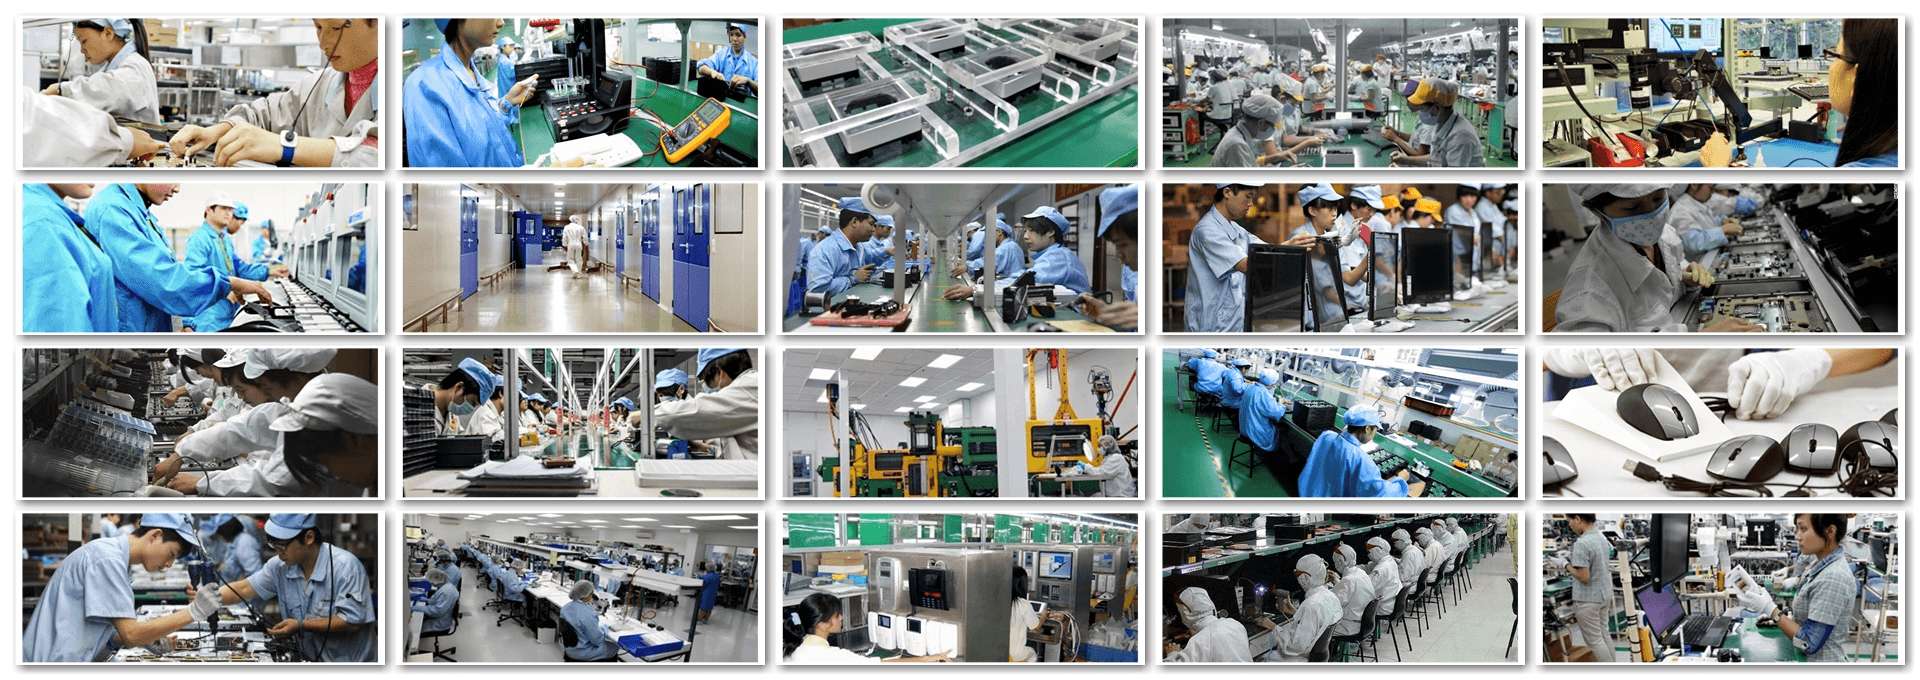 FINAL ASSEMBLY & MASS MANUFACTURING LINES 